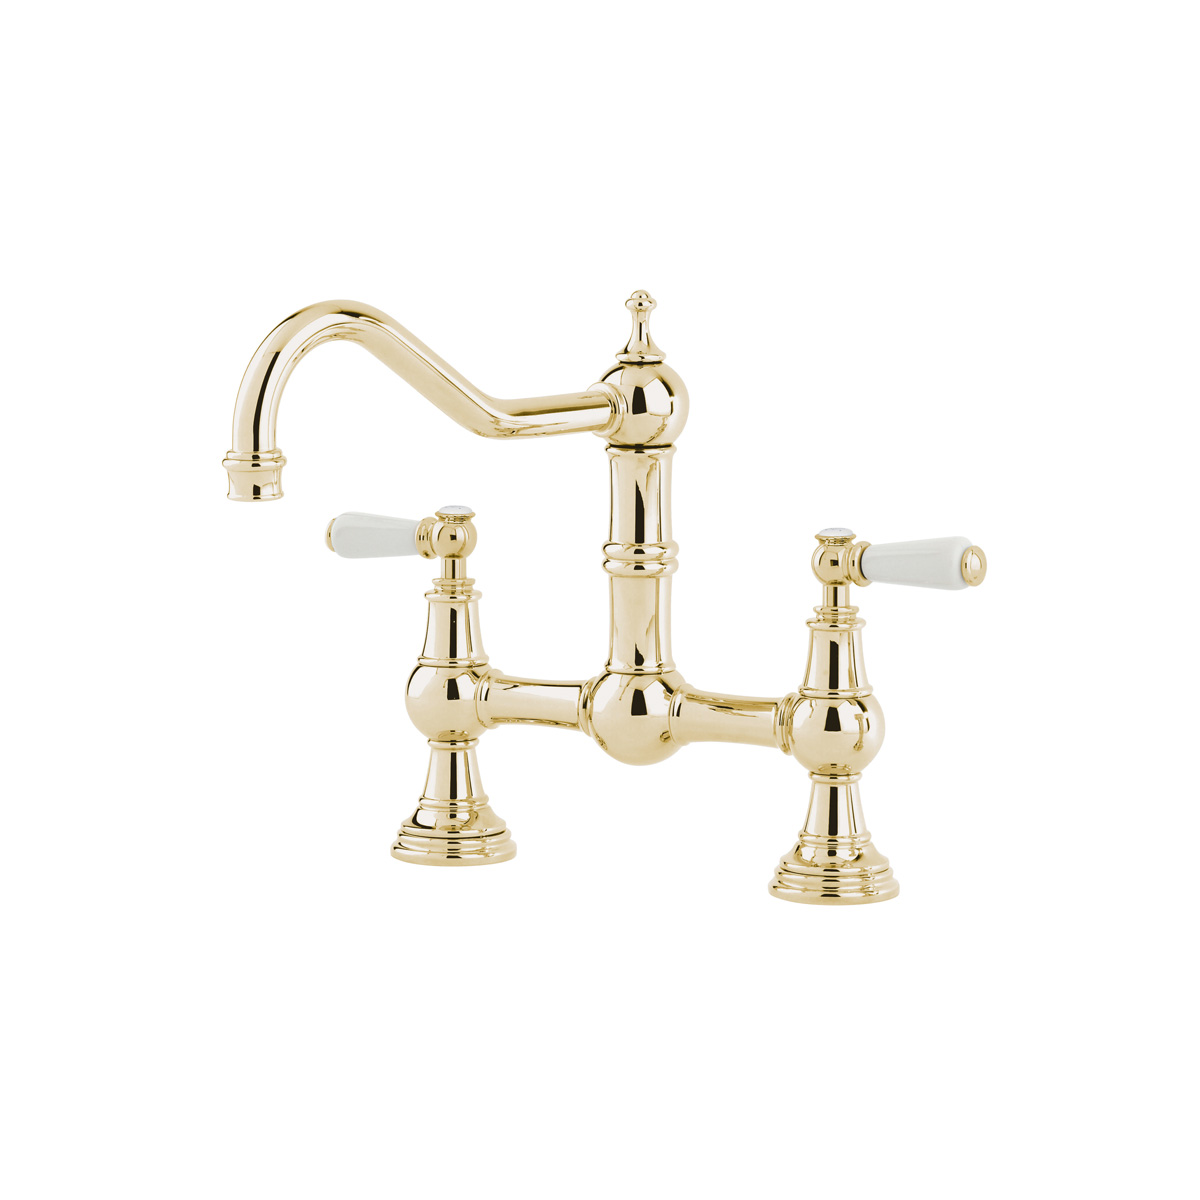 Shaws by Perrin & Rowe Hambleton French bridge mixer in Gold. Provence style kitchen tap AUSH.4751. Distributed in Australia by Luxe by Design, Brisbane.